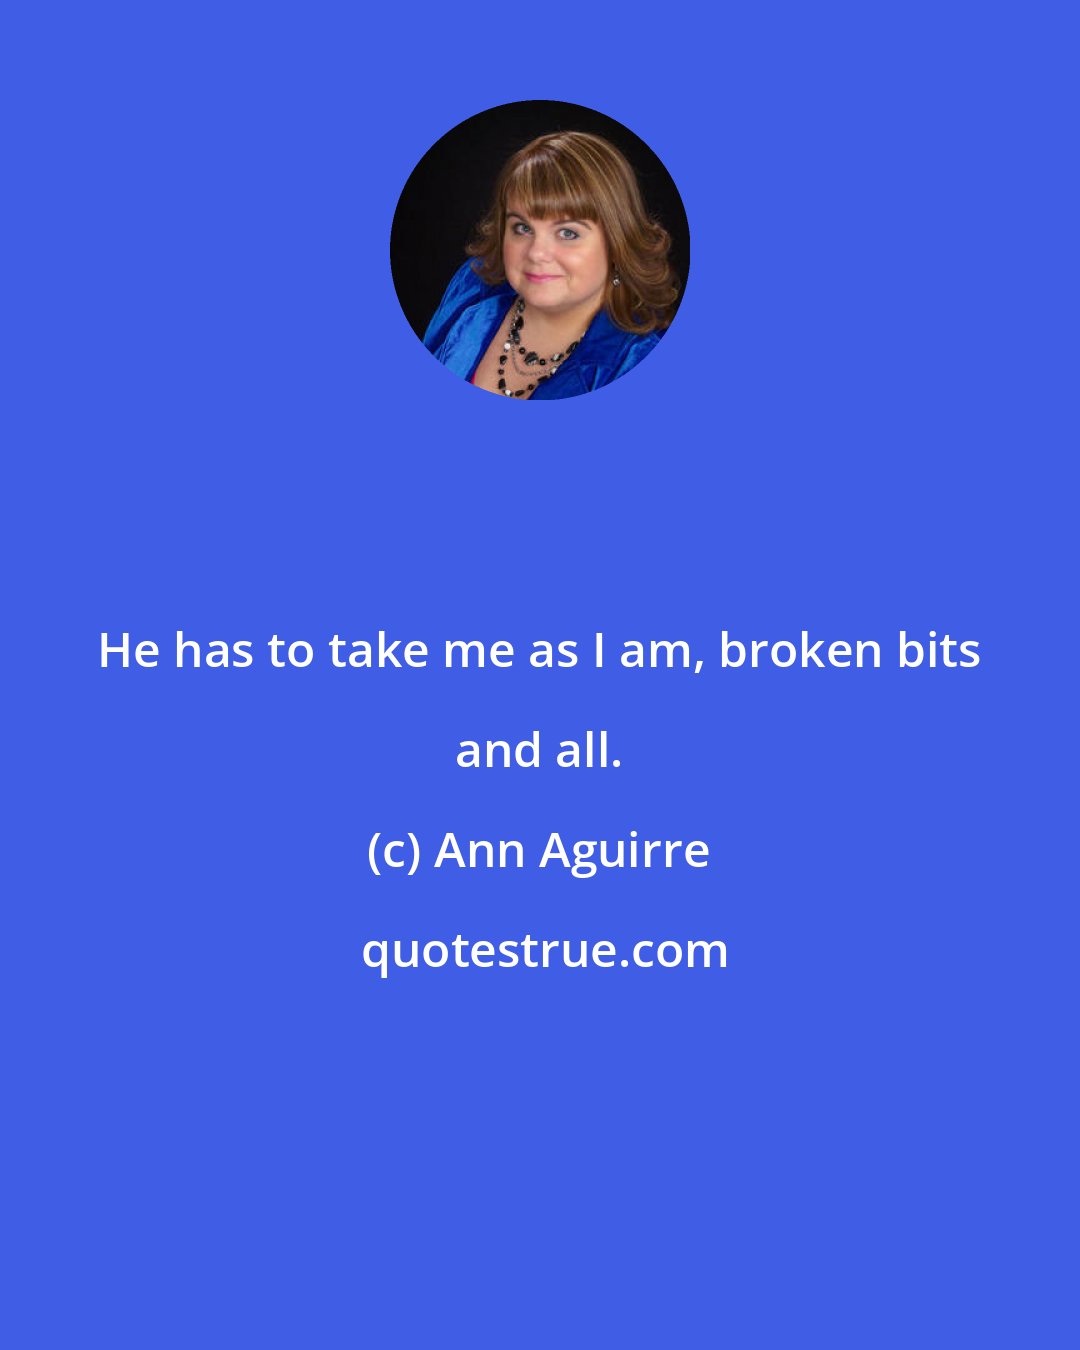 Ann Aguirre: He has to take me as I am, broken bits and all.